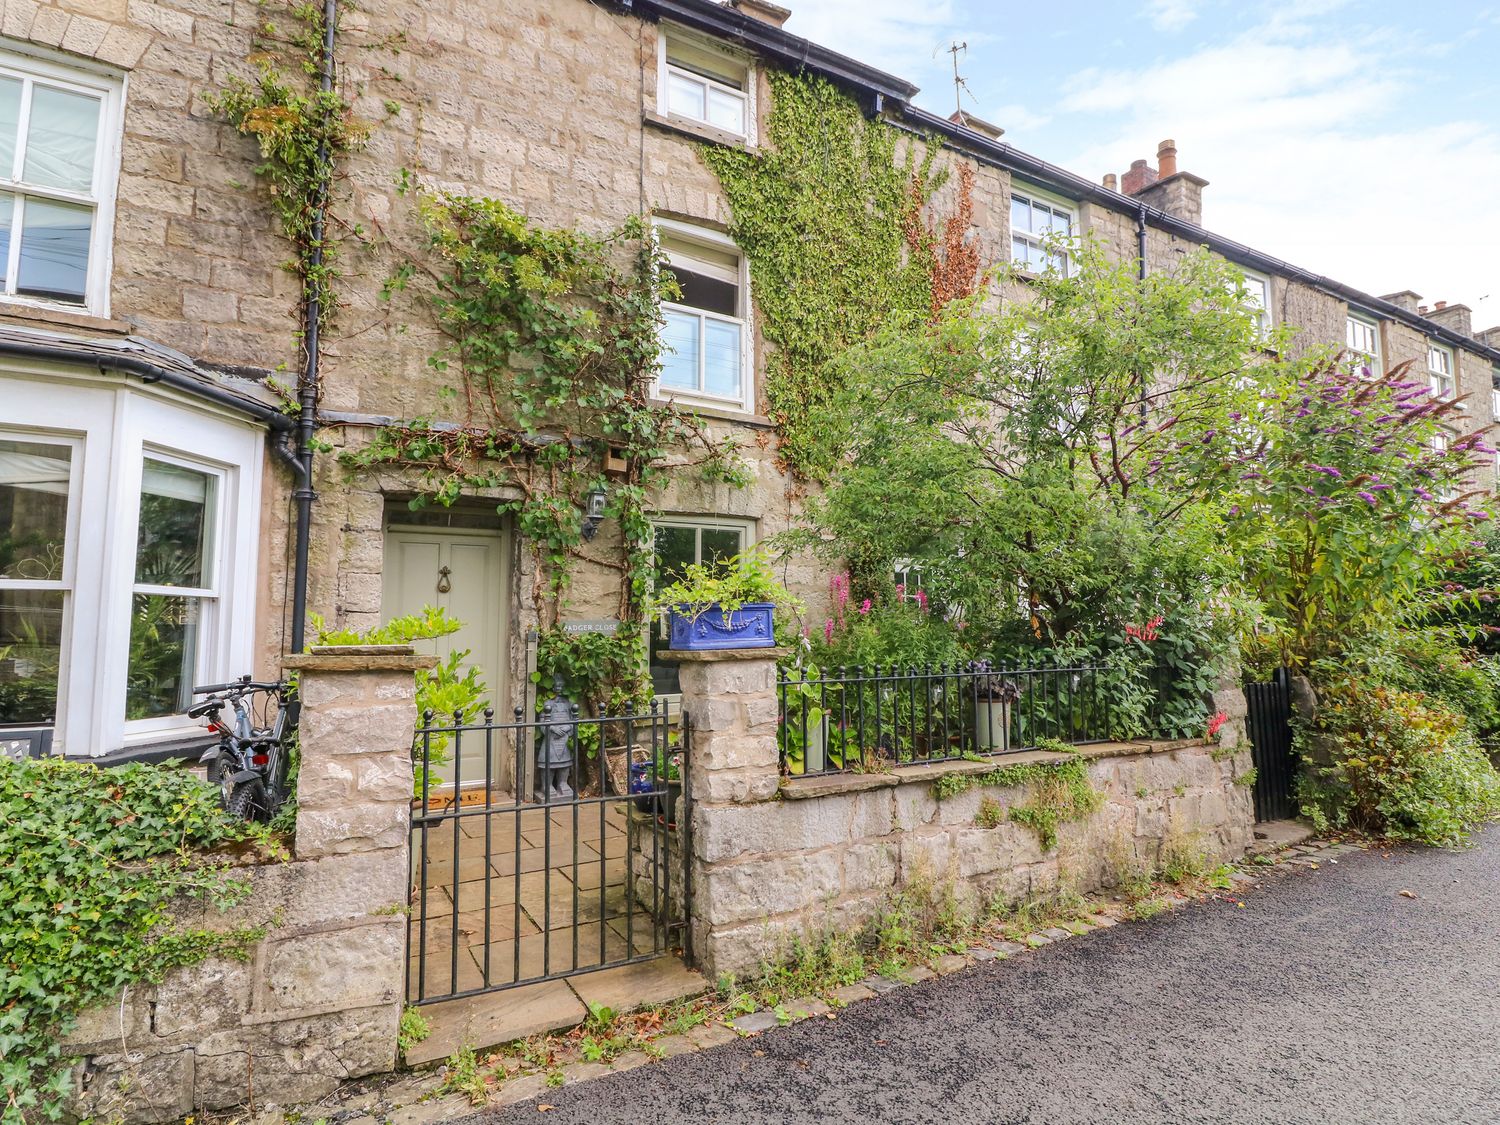 beautiful cottages in historic market town of Kendal and the surrounding villages